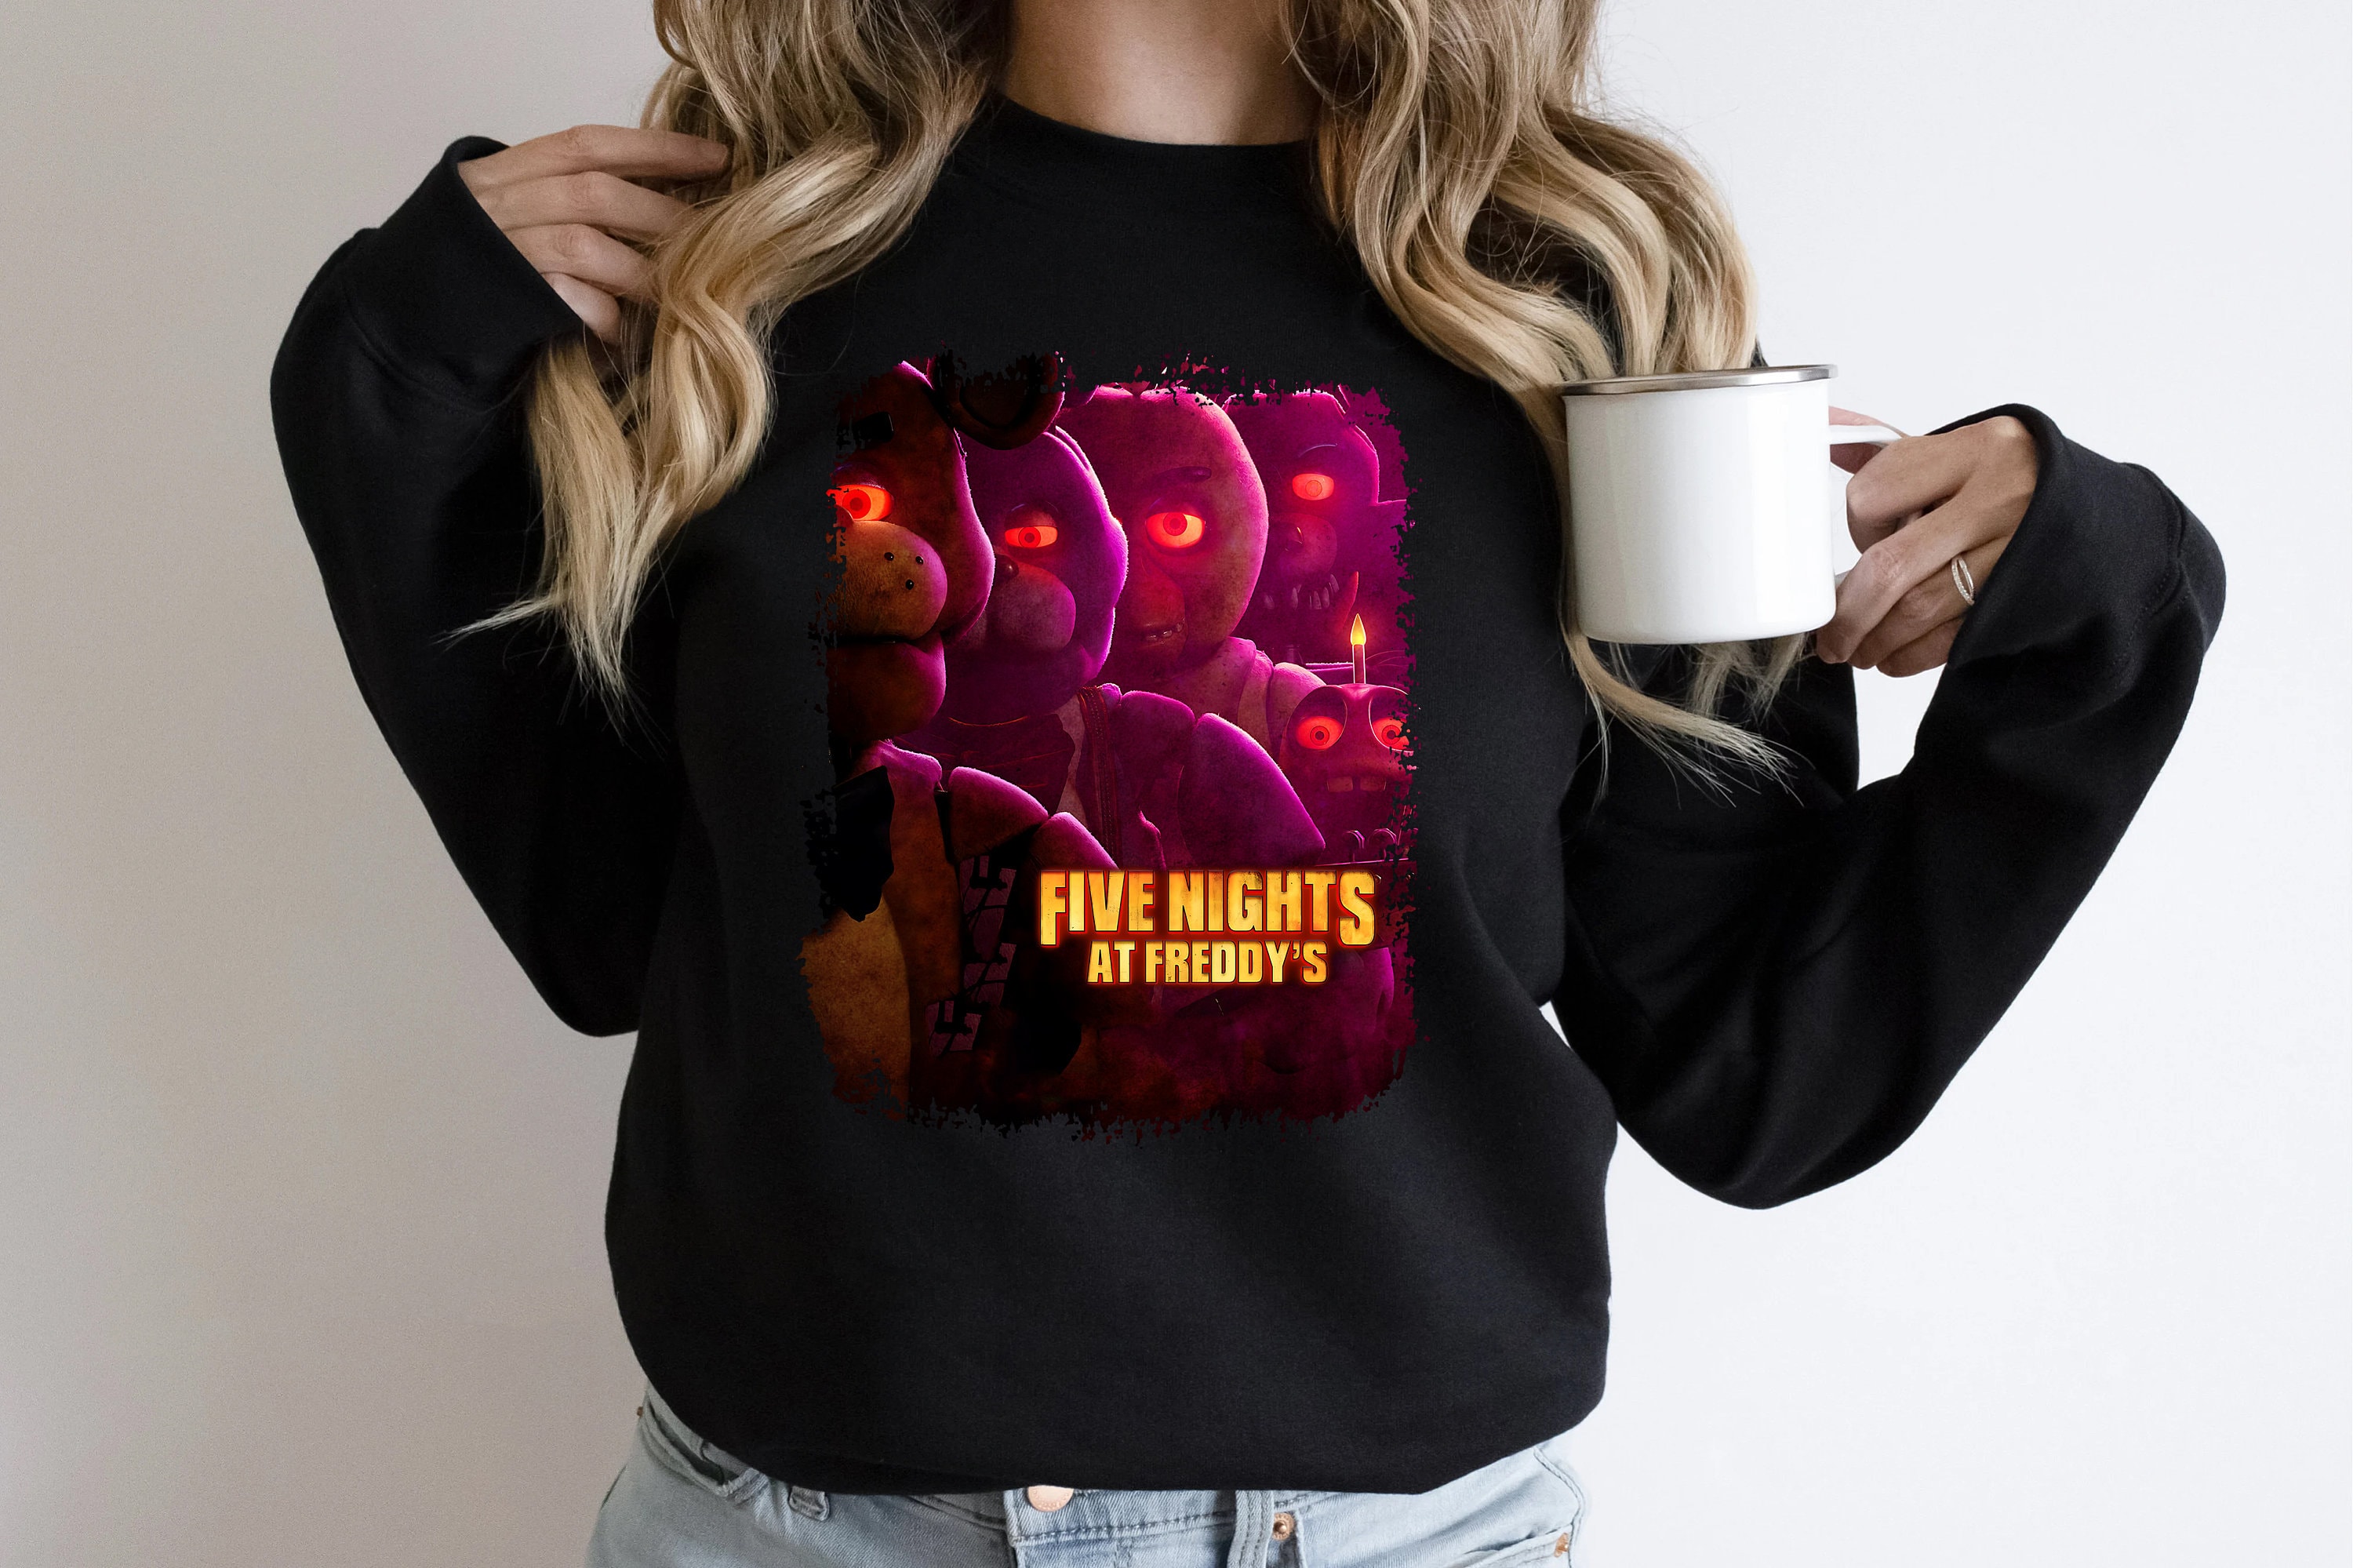 Personalized Five Nights at Freddy's Birthday Shirt Youth Toddler and Adult Sizes Available White Youth Medium